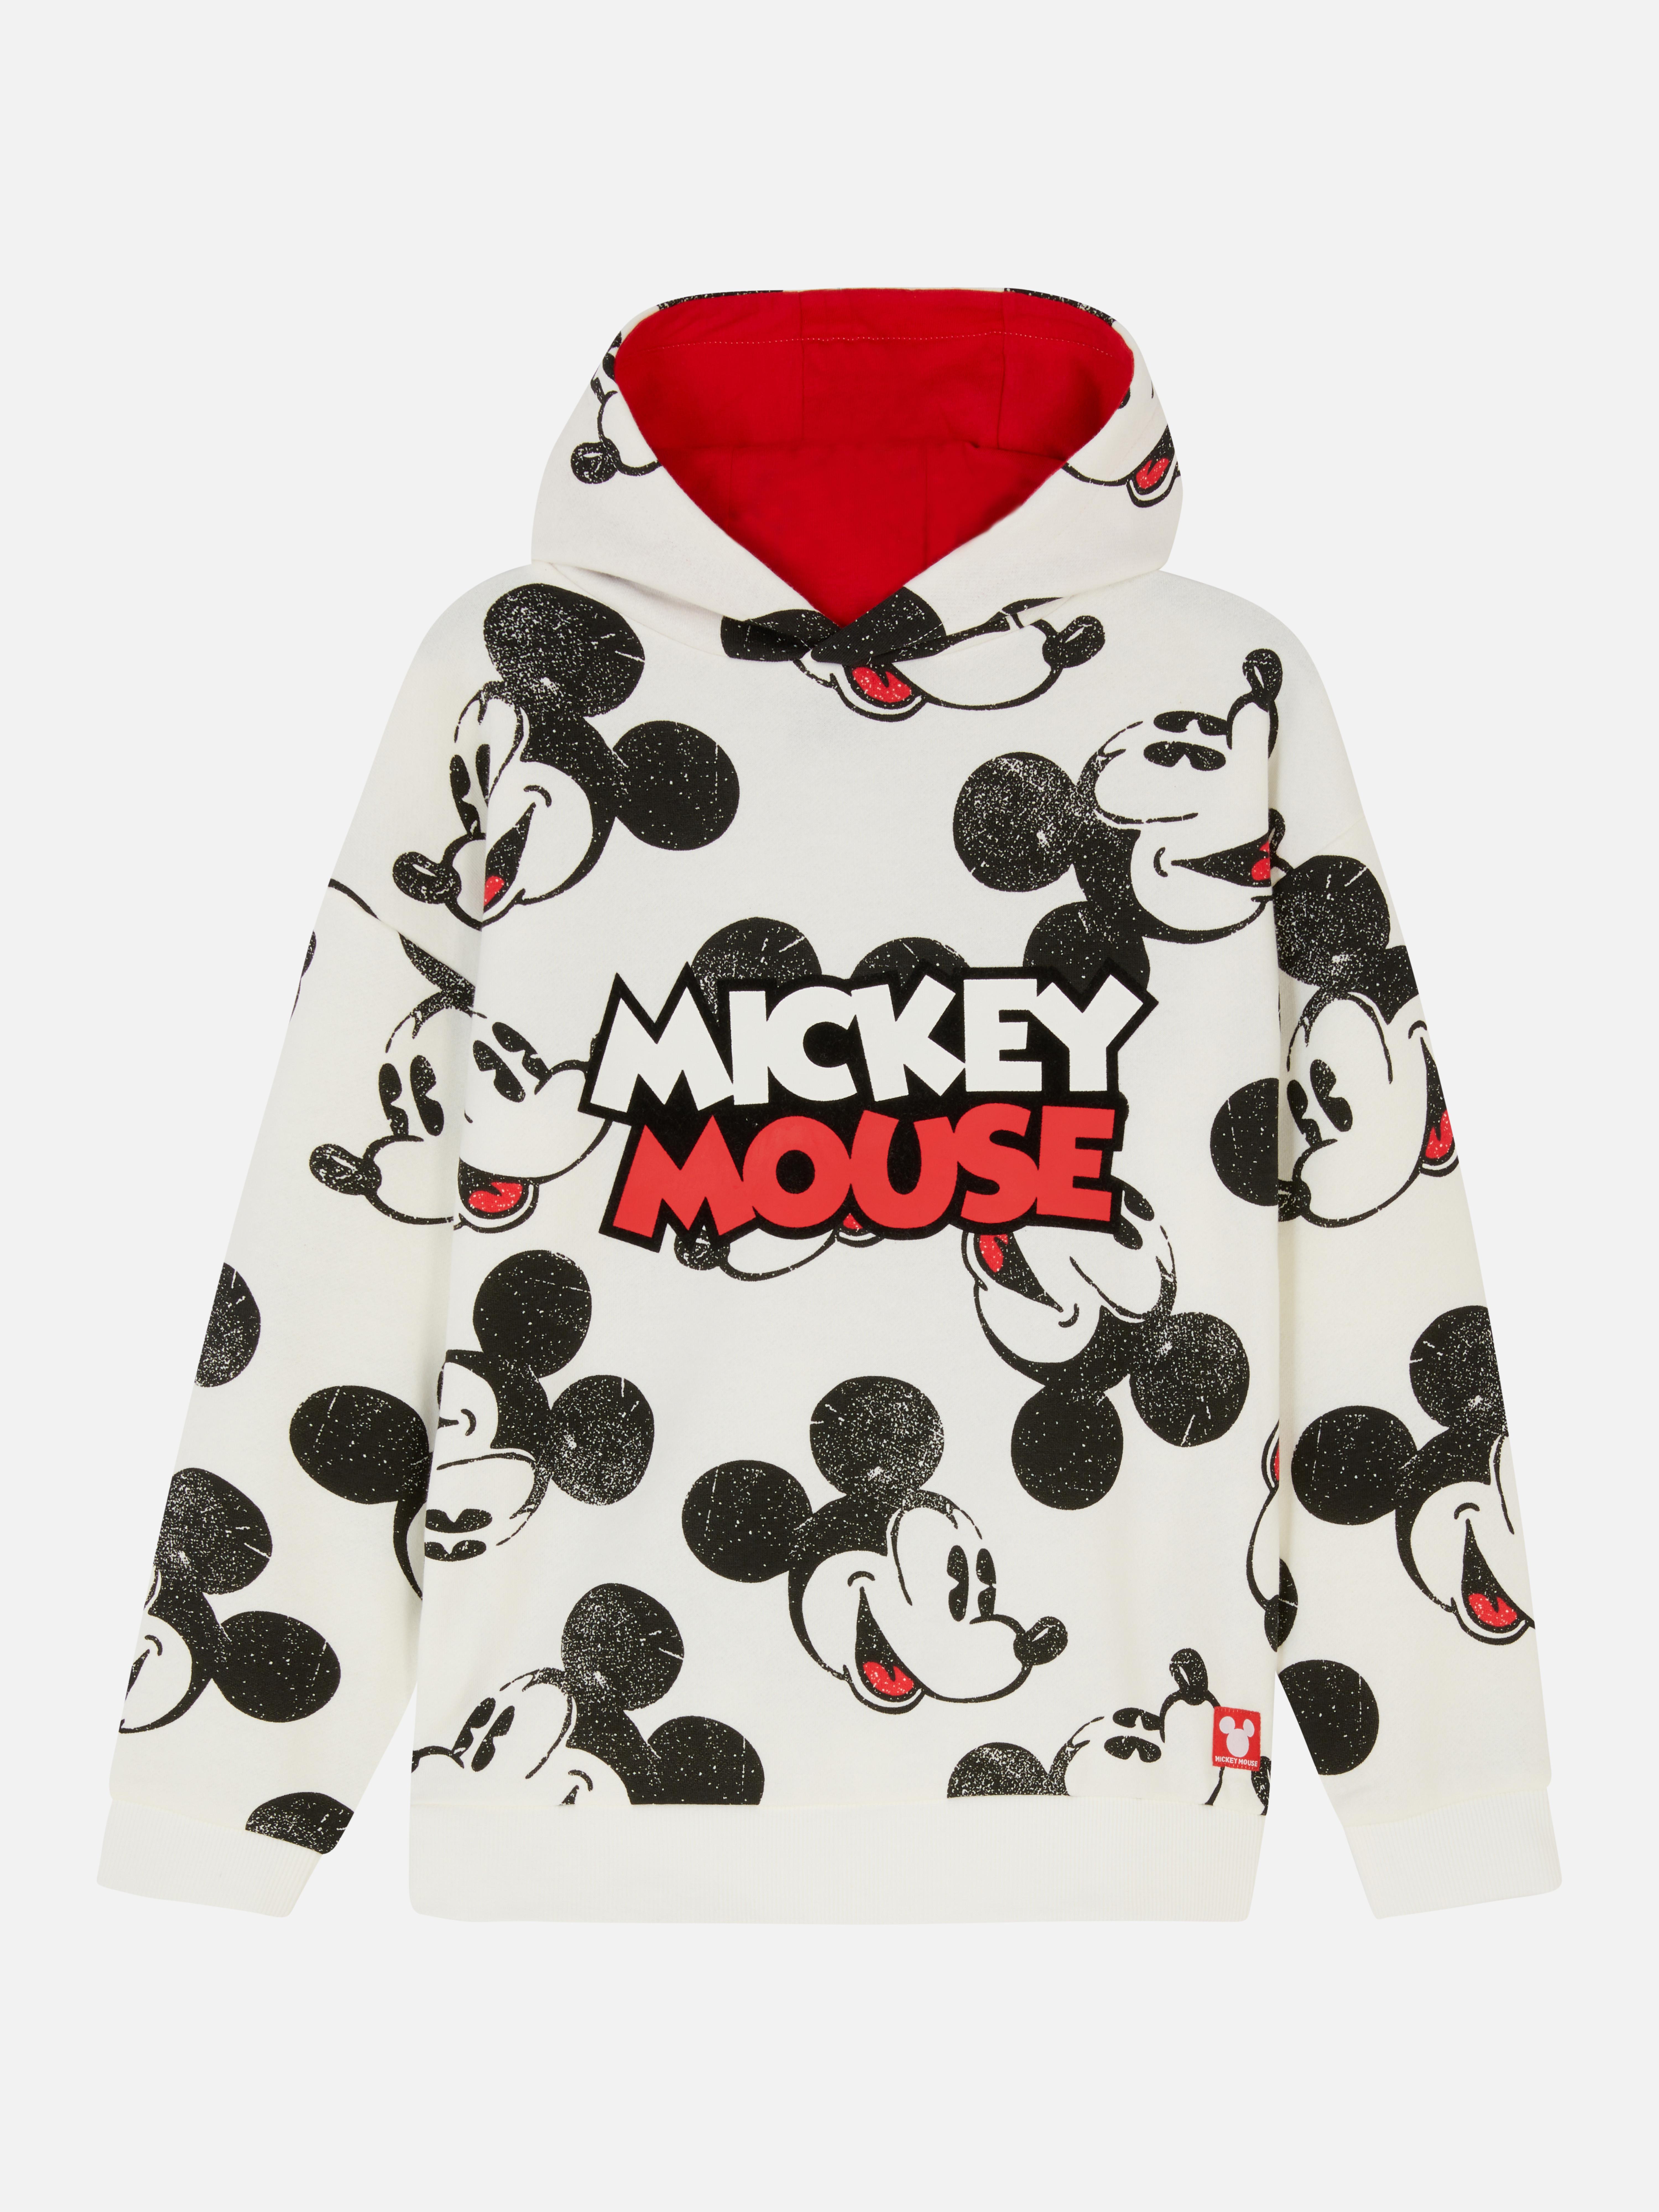 Disney's Mickey Mouse Printed Pullover Hoodie